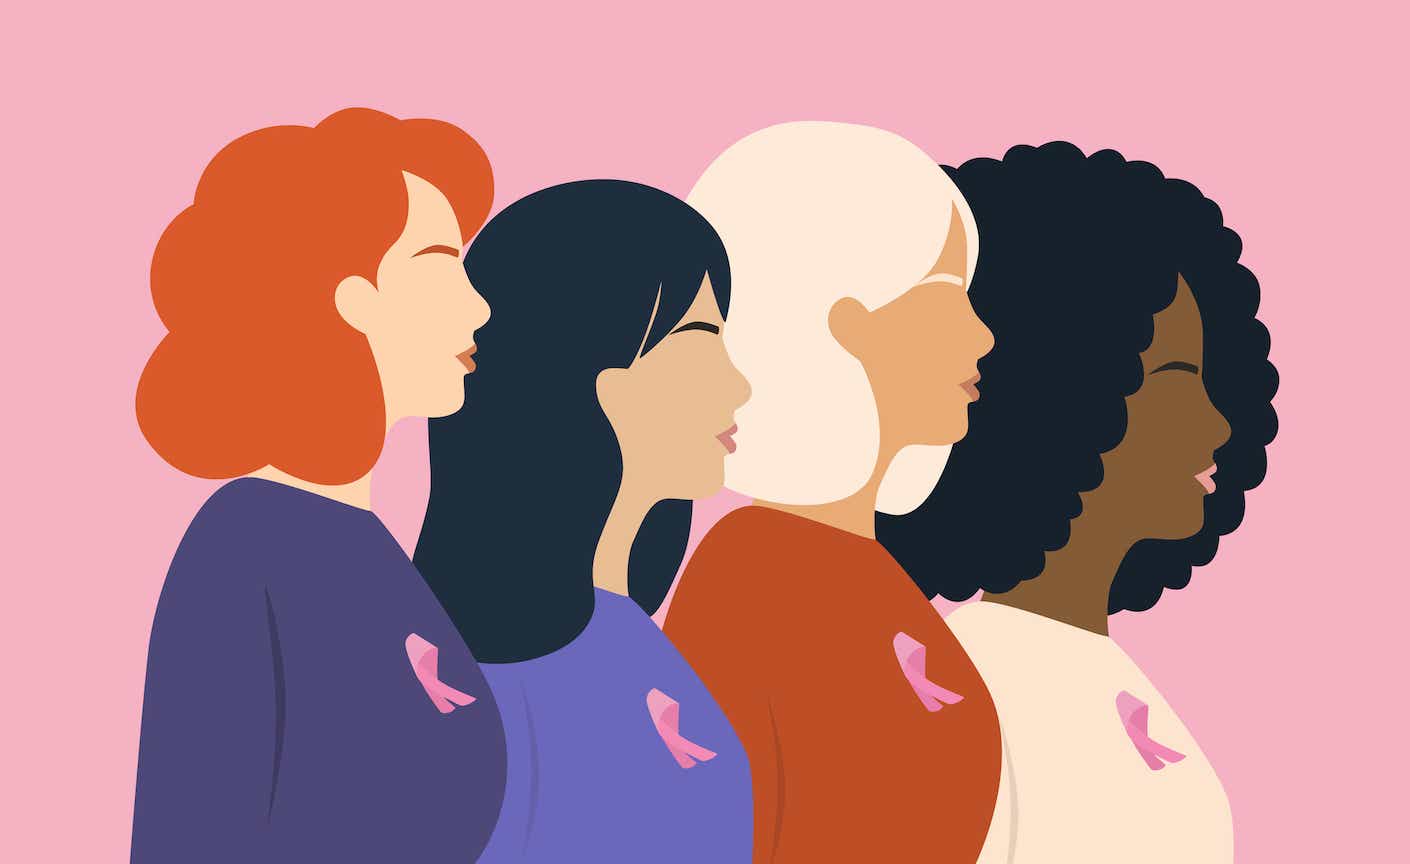 Illustration of four women with breast cancer ribbons